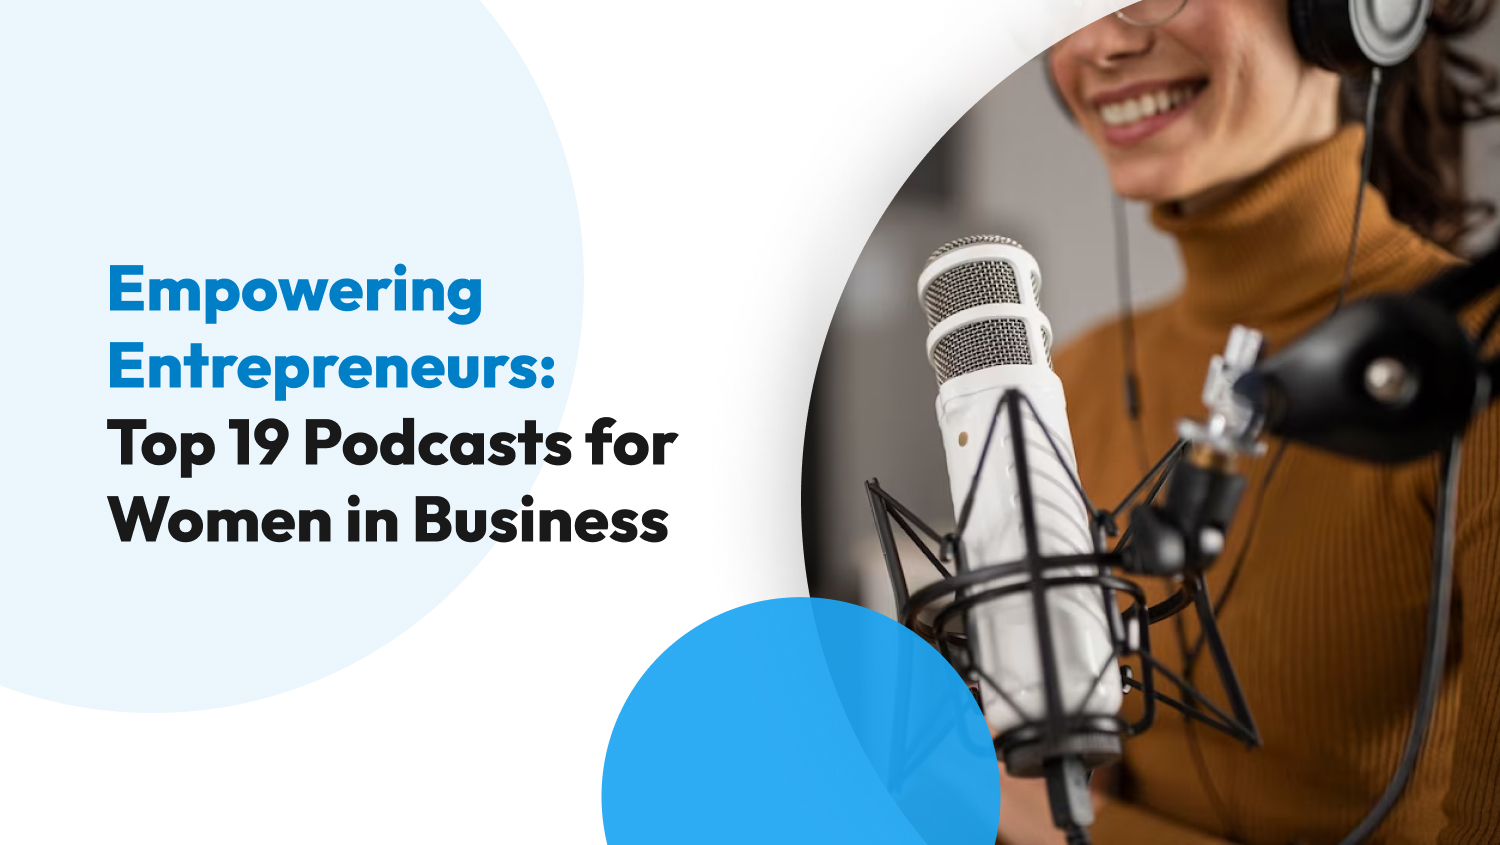 Empowering Entrepreneurs: Top 19 Podcasts for Women in Business